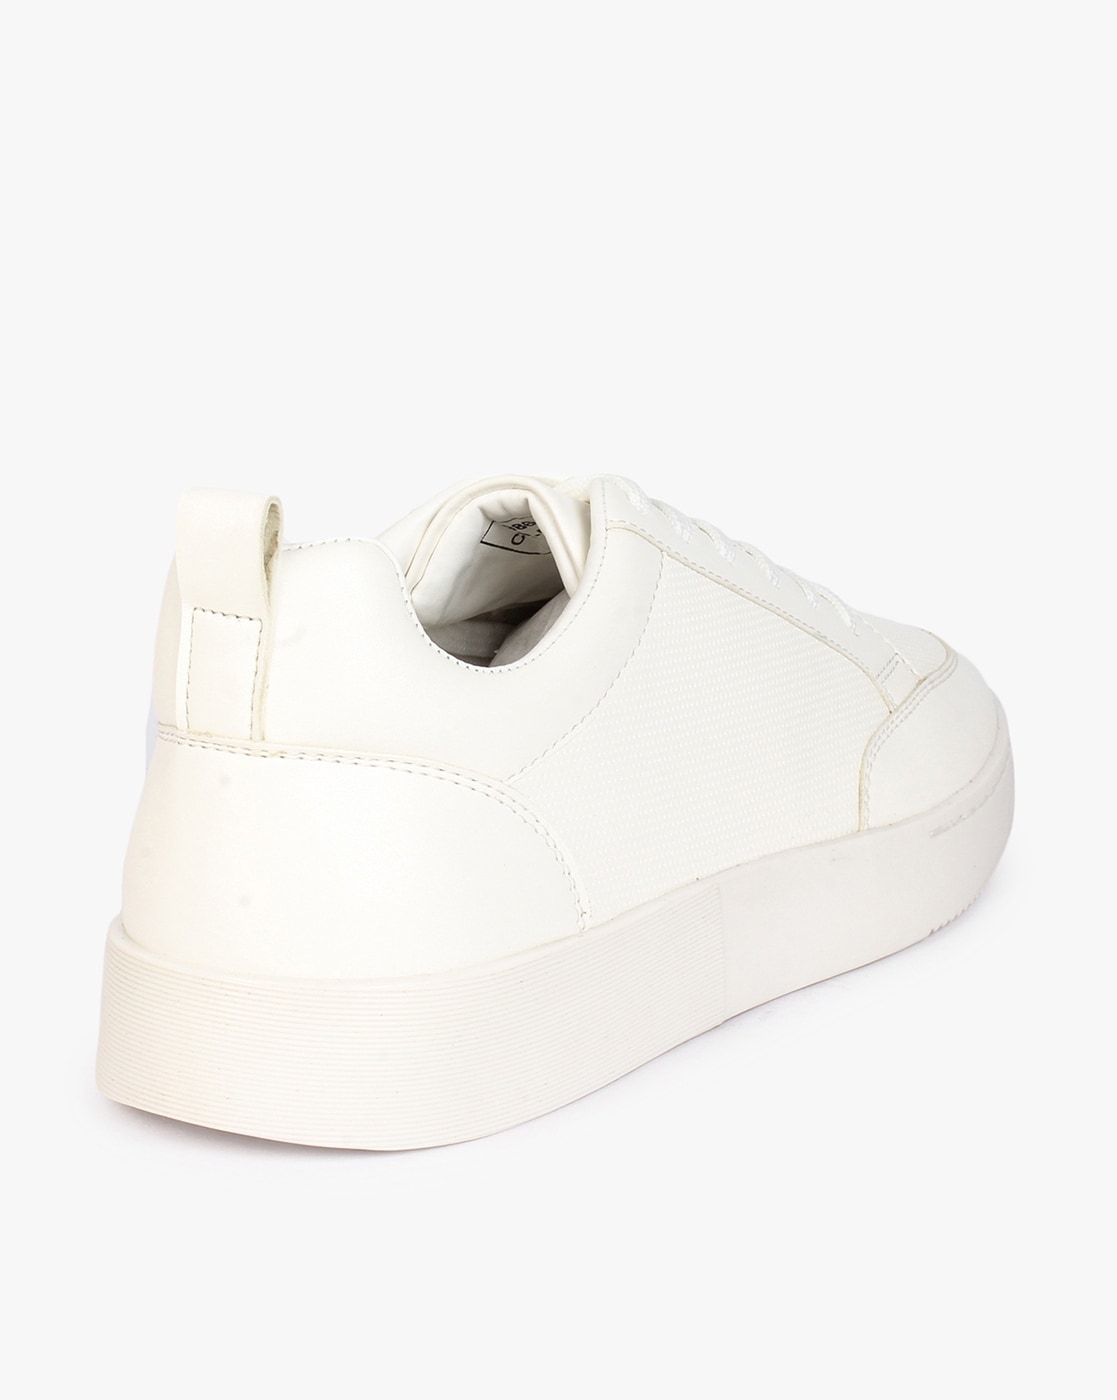 Men's Classic White Synthetic Leather Casual Shoes – Designer mart